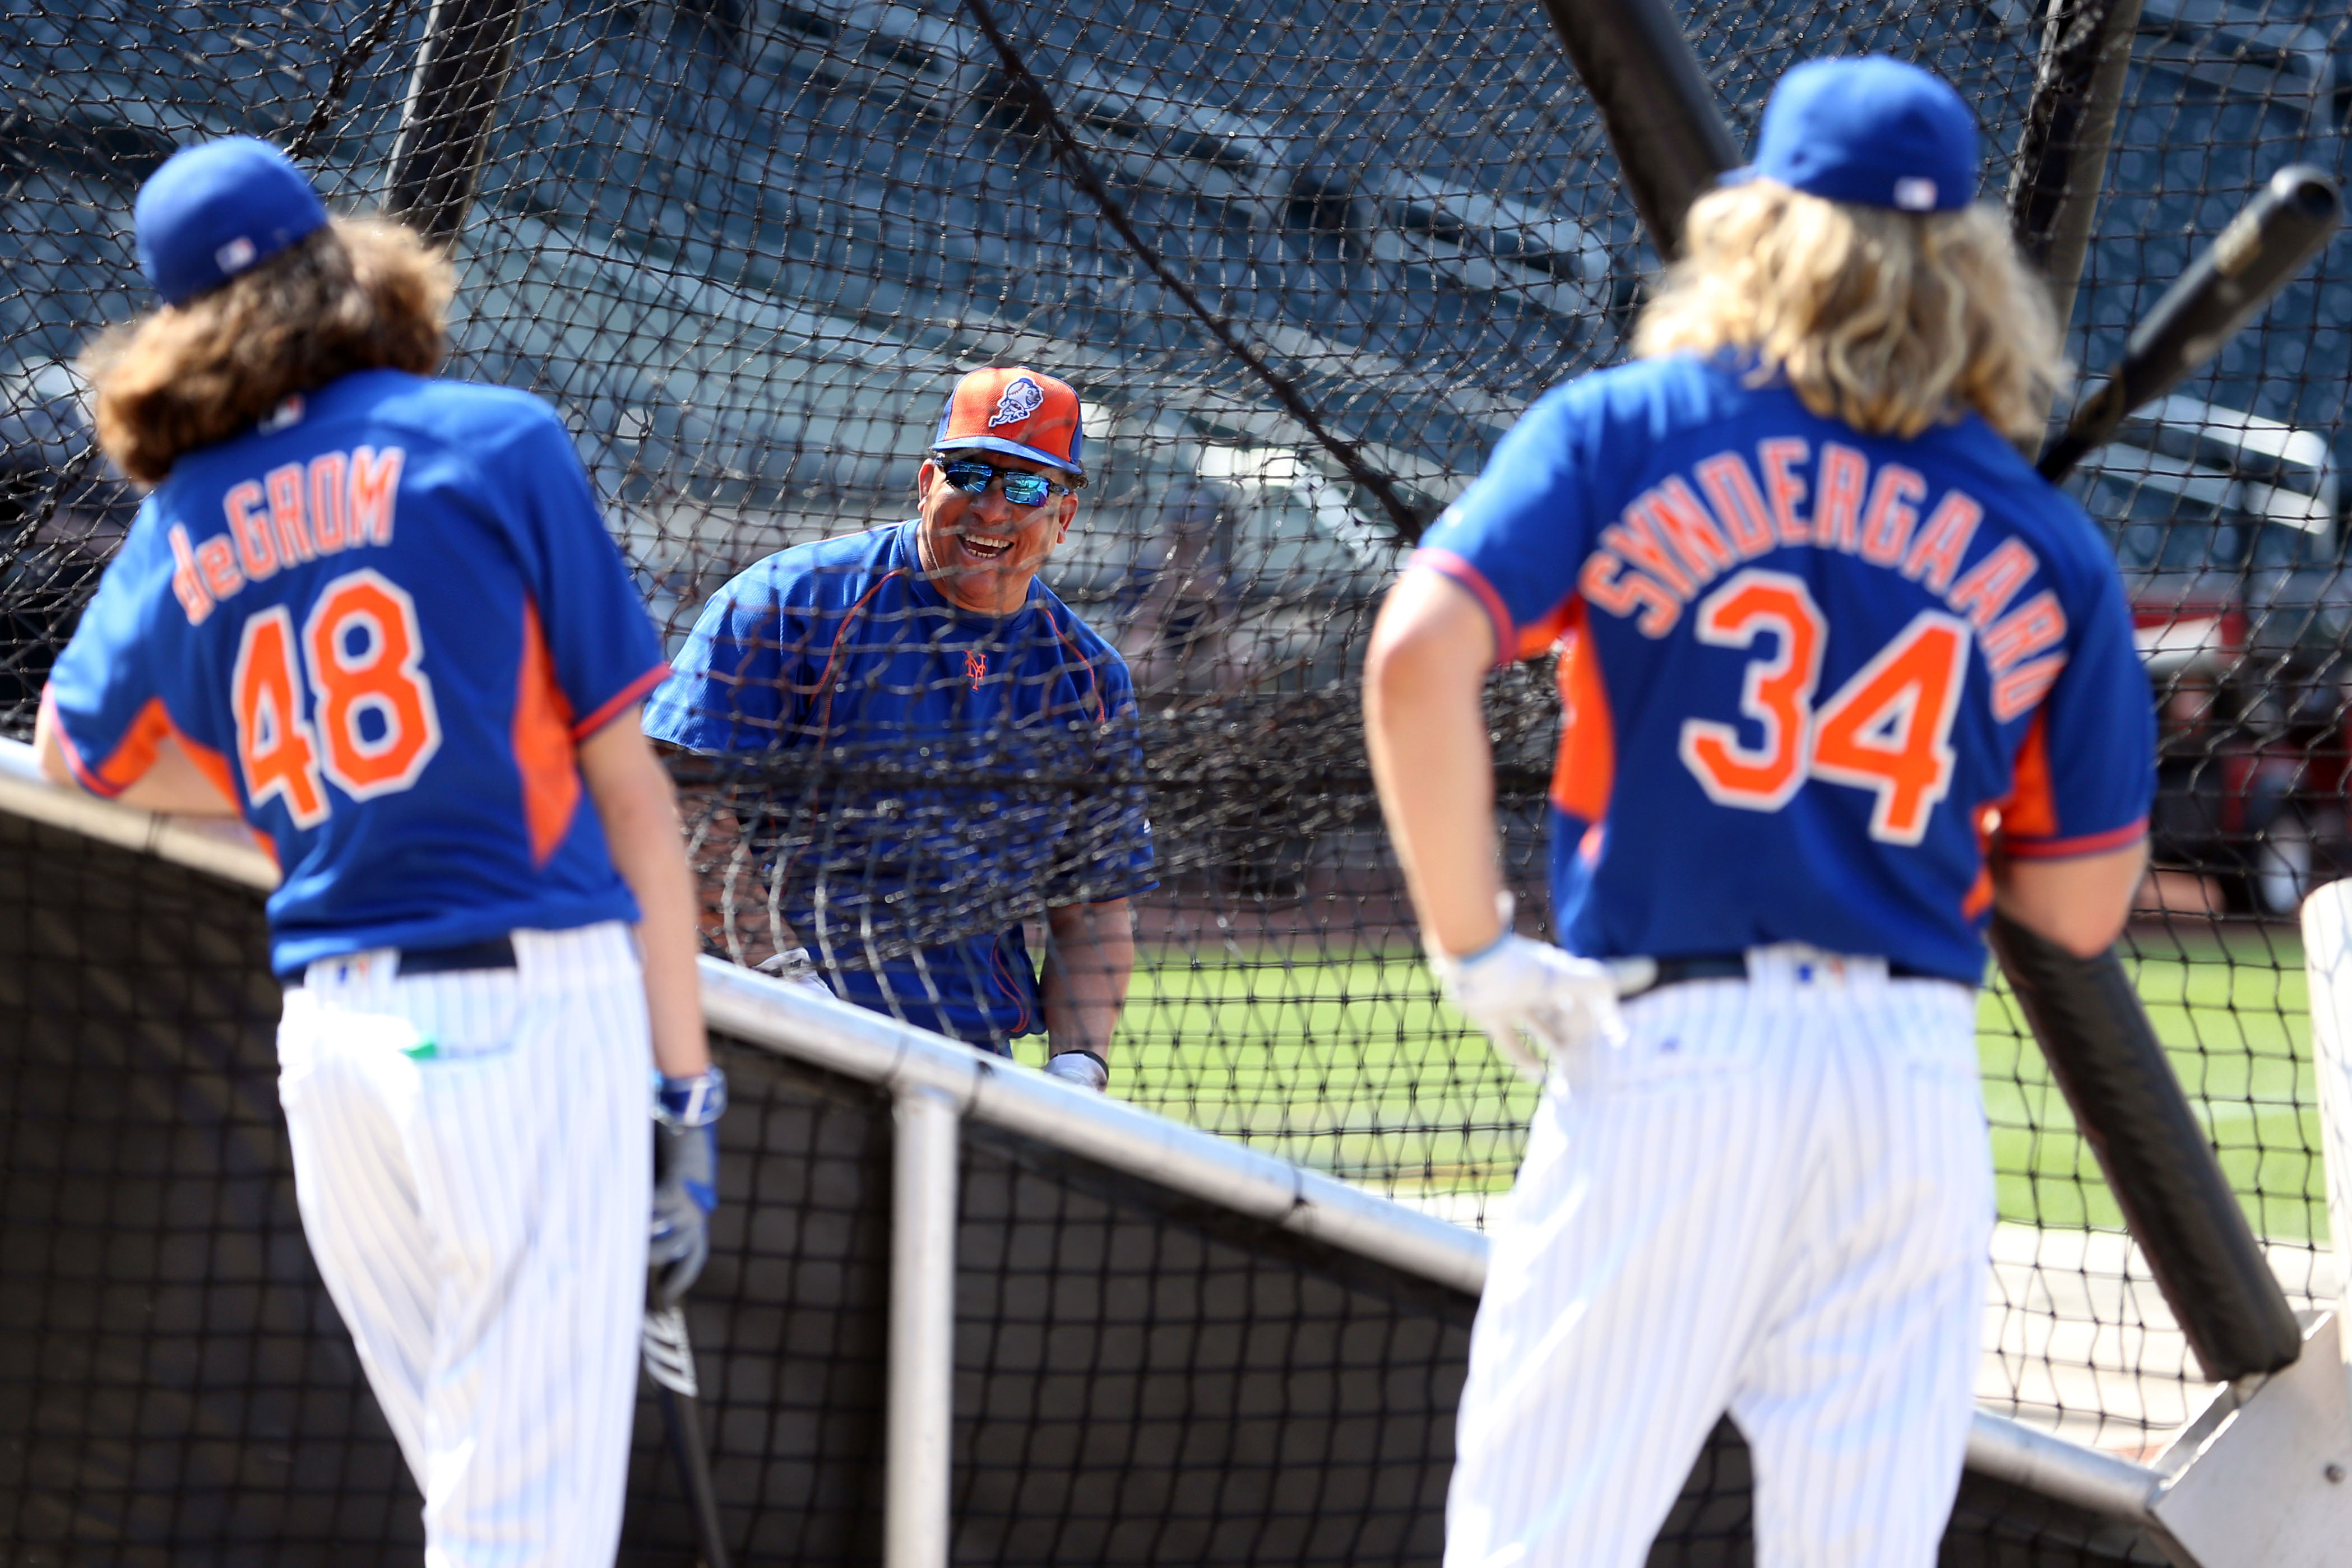 Mets pitchers Jacob deGrom, Bartolo Colon and Noah Syndergaard (Brad Penner/USA TODAY Sports Images)